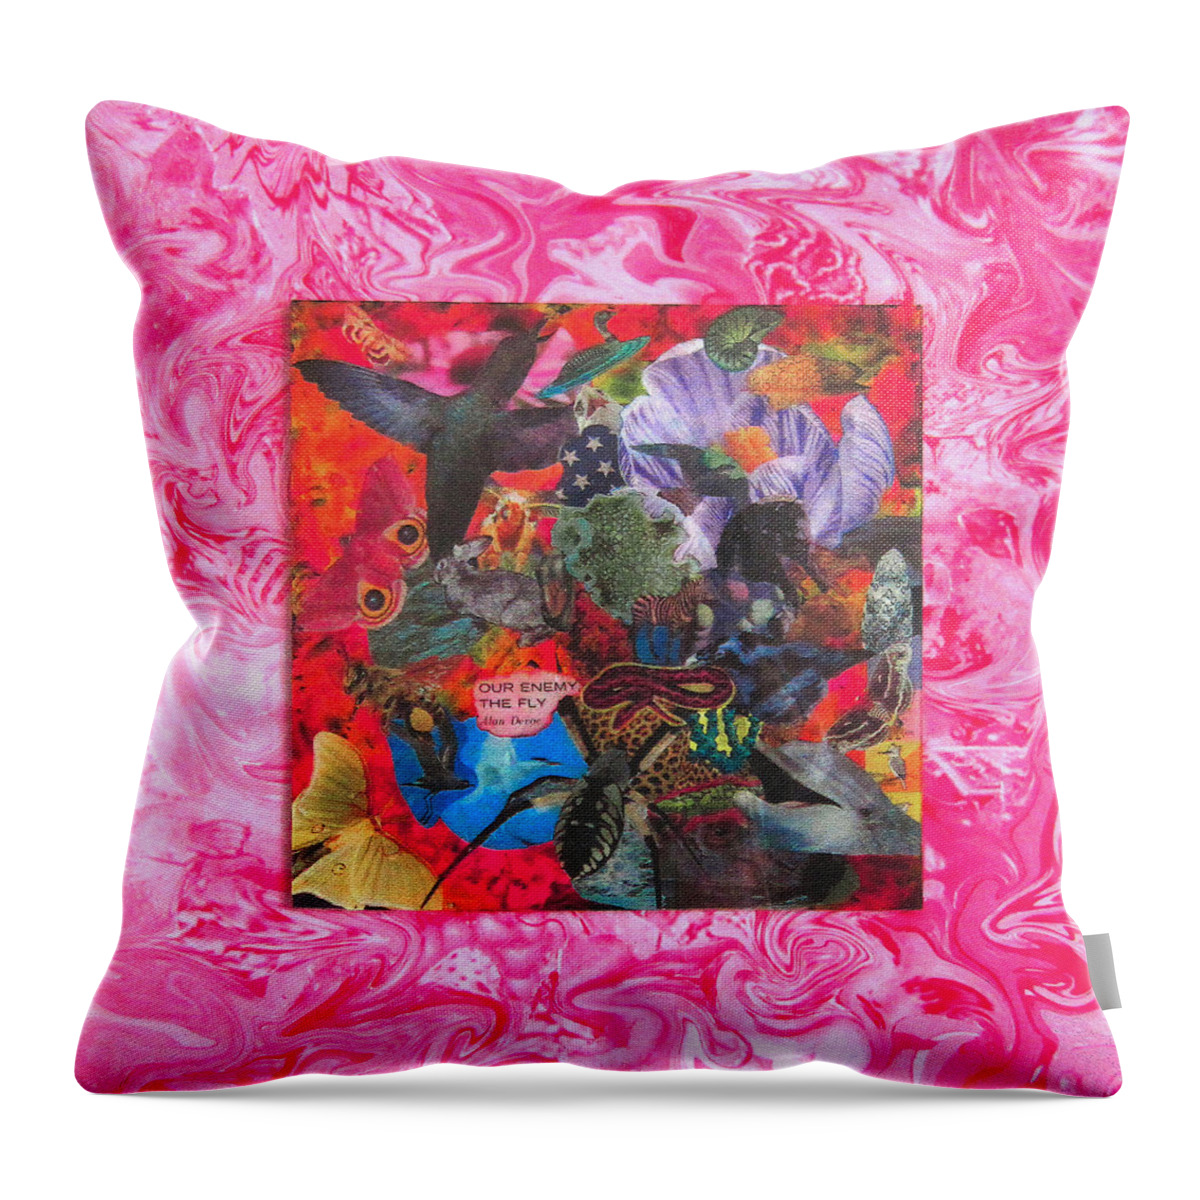  Throw Pillow featuring the painting Our Enemy The Fly by Steve Fields